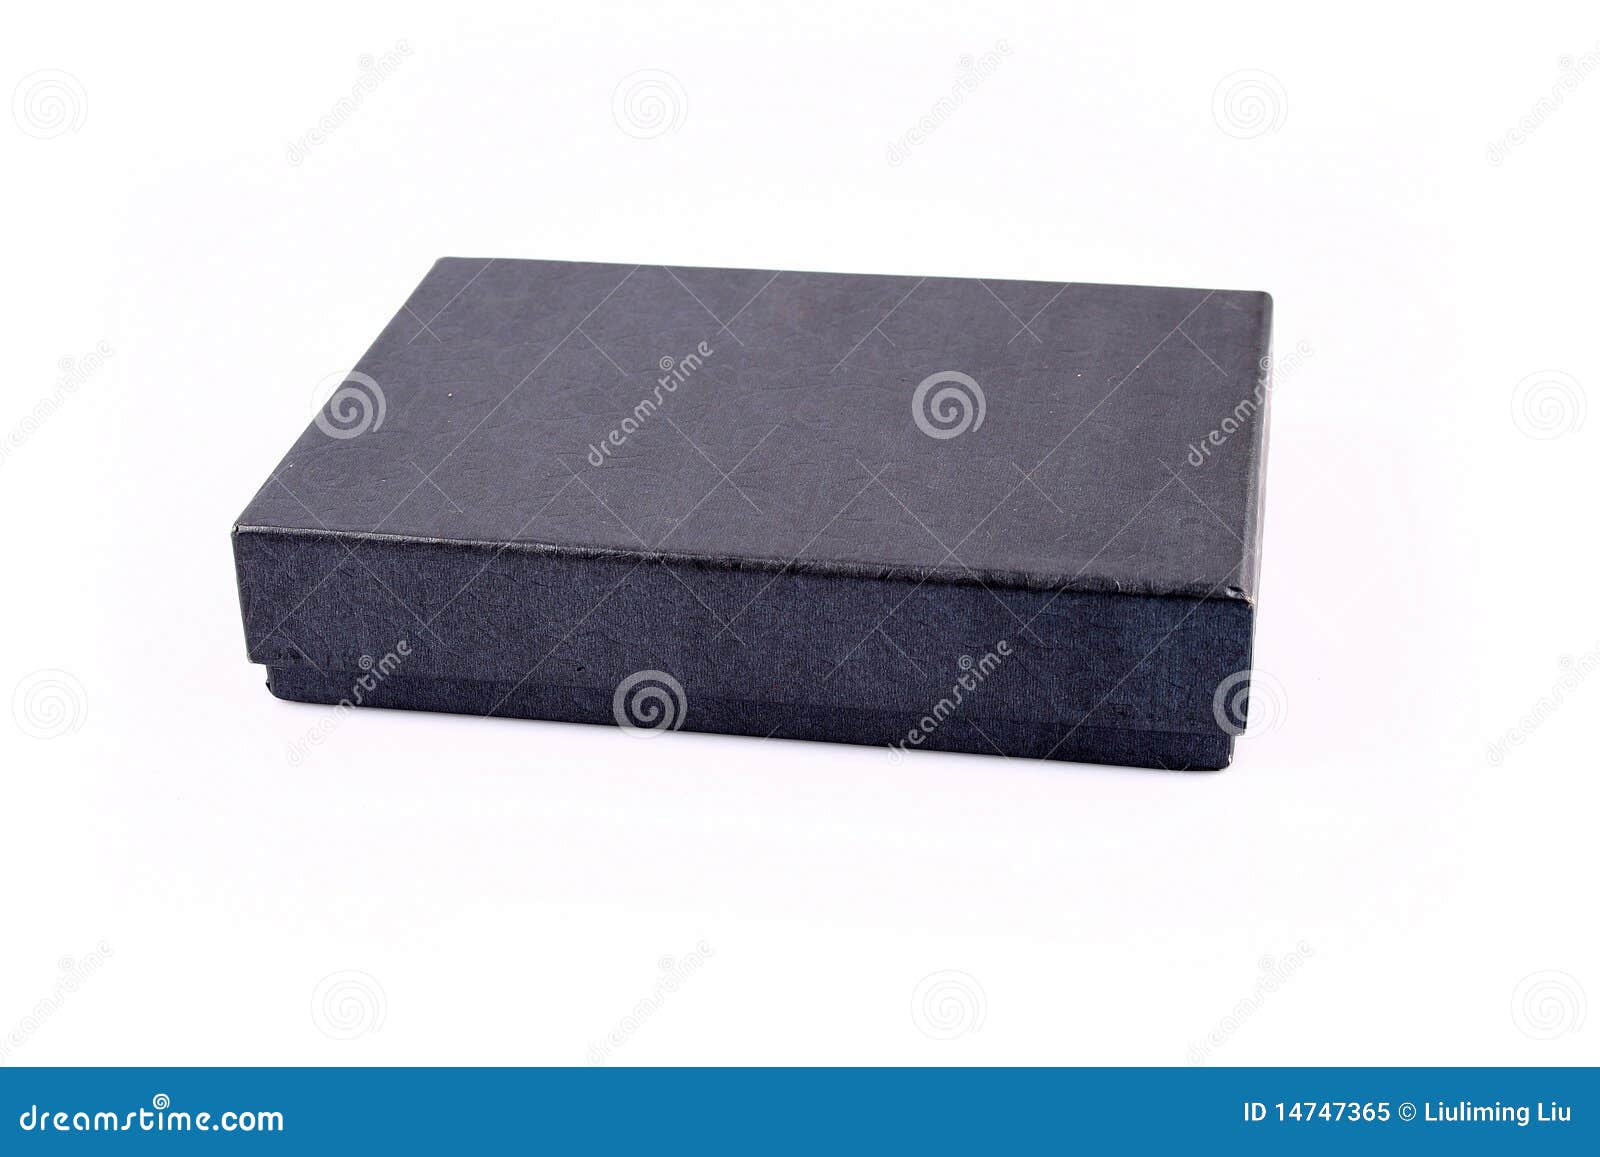 Black box stock image. Image of backgrounds, concepts - 14747365